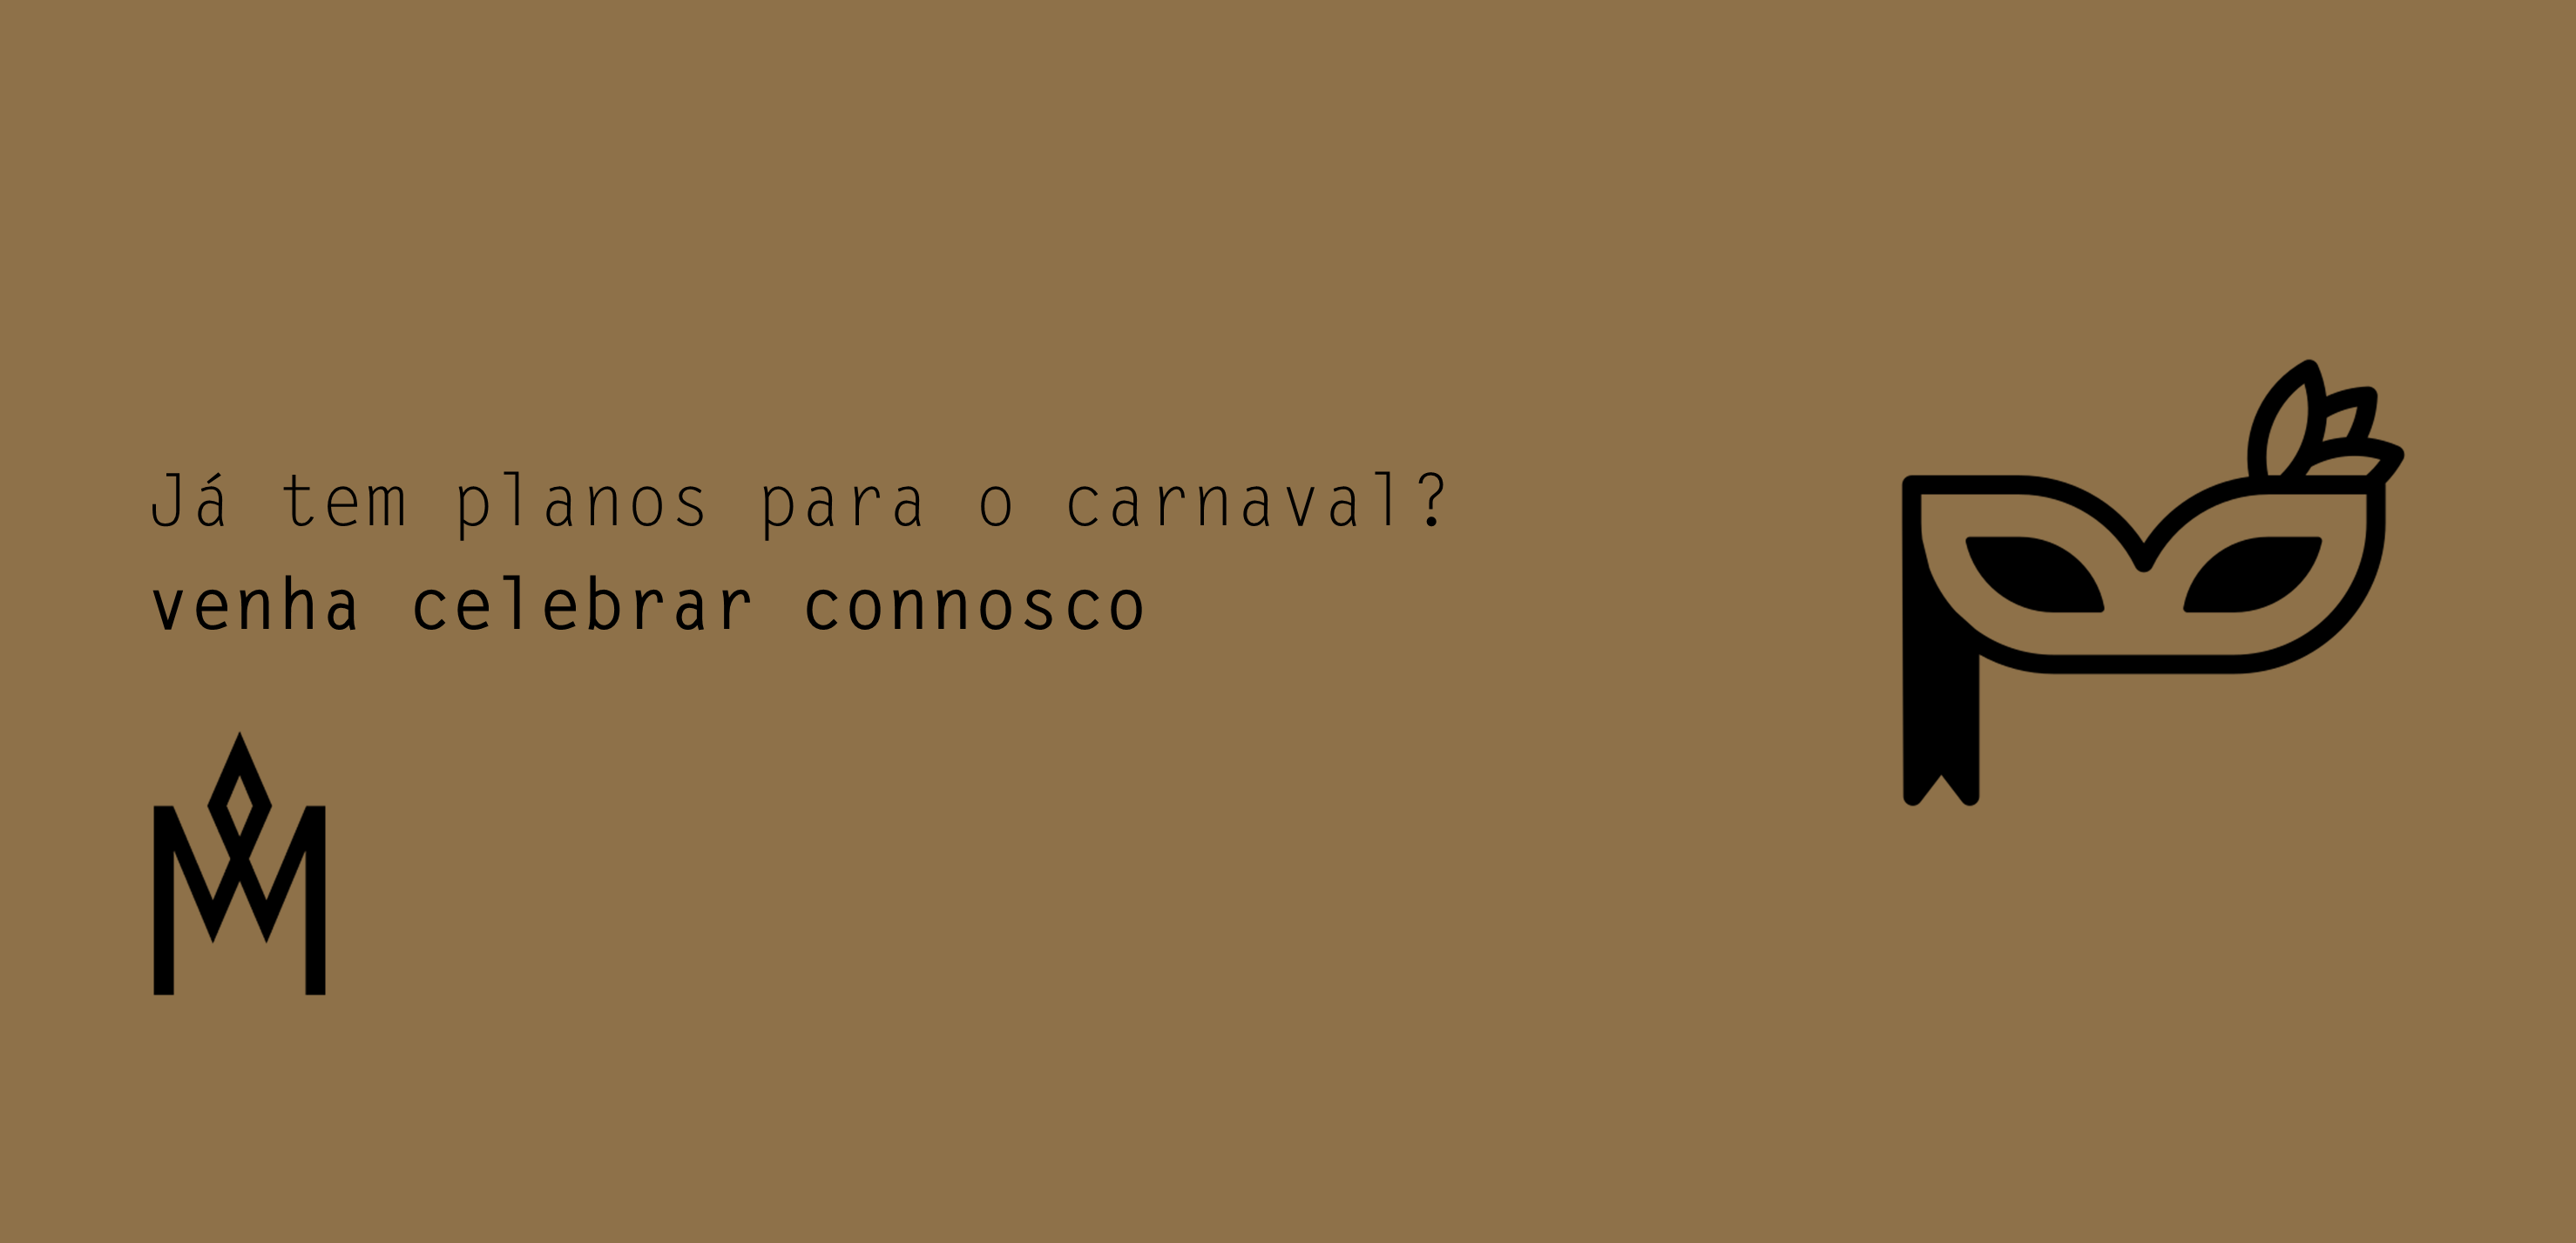 https://www.mmipo.pt/assets/misc/img/2023/2023%2002%20Carnaval/banner.png